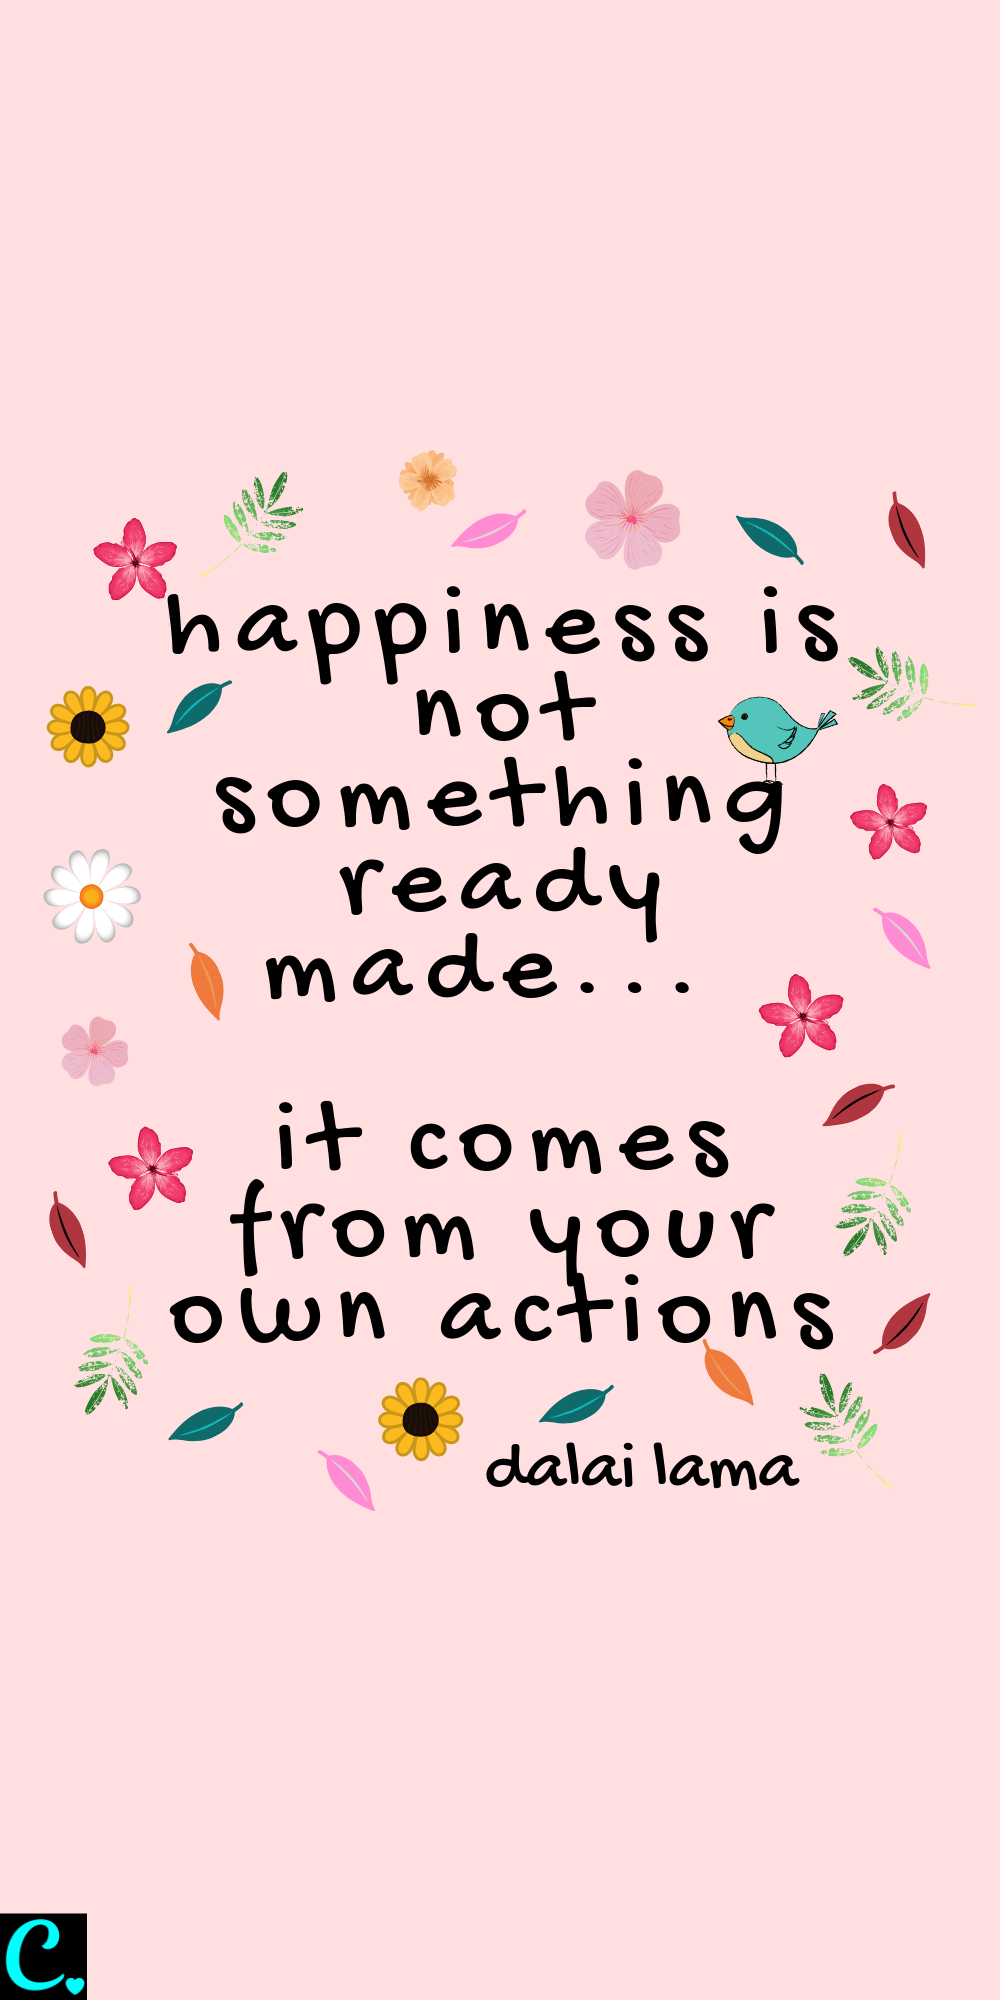 Happiness is not something ready made, it comes from your own actions | Dalai Lama quote | happiness quote | how to be happy | #happinessquote #dalailamaquote #quotesabouthappiness